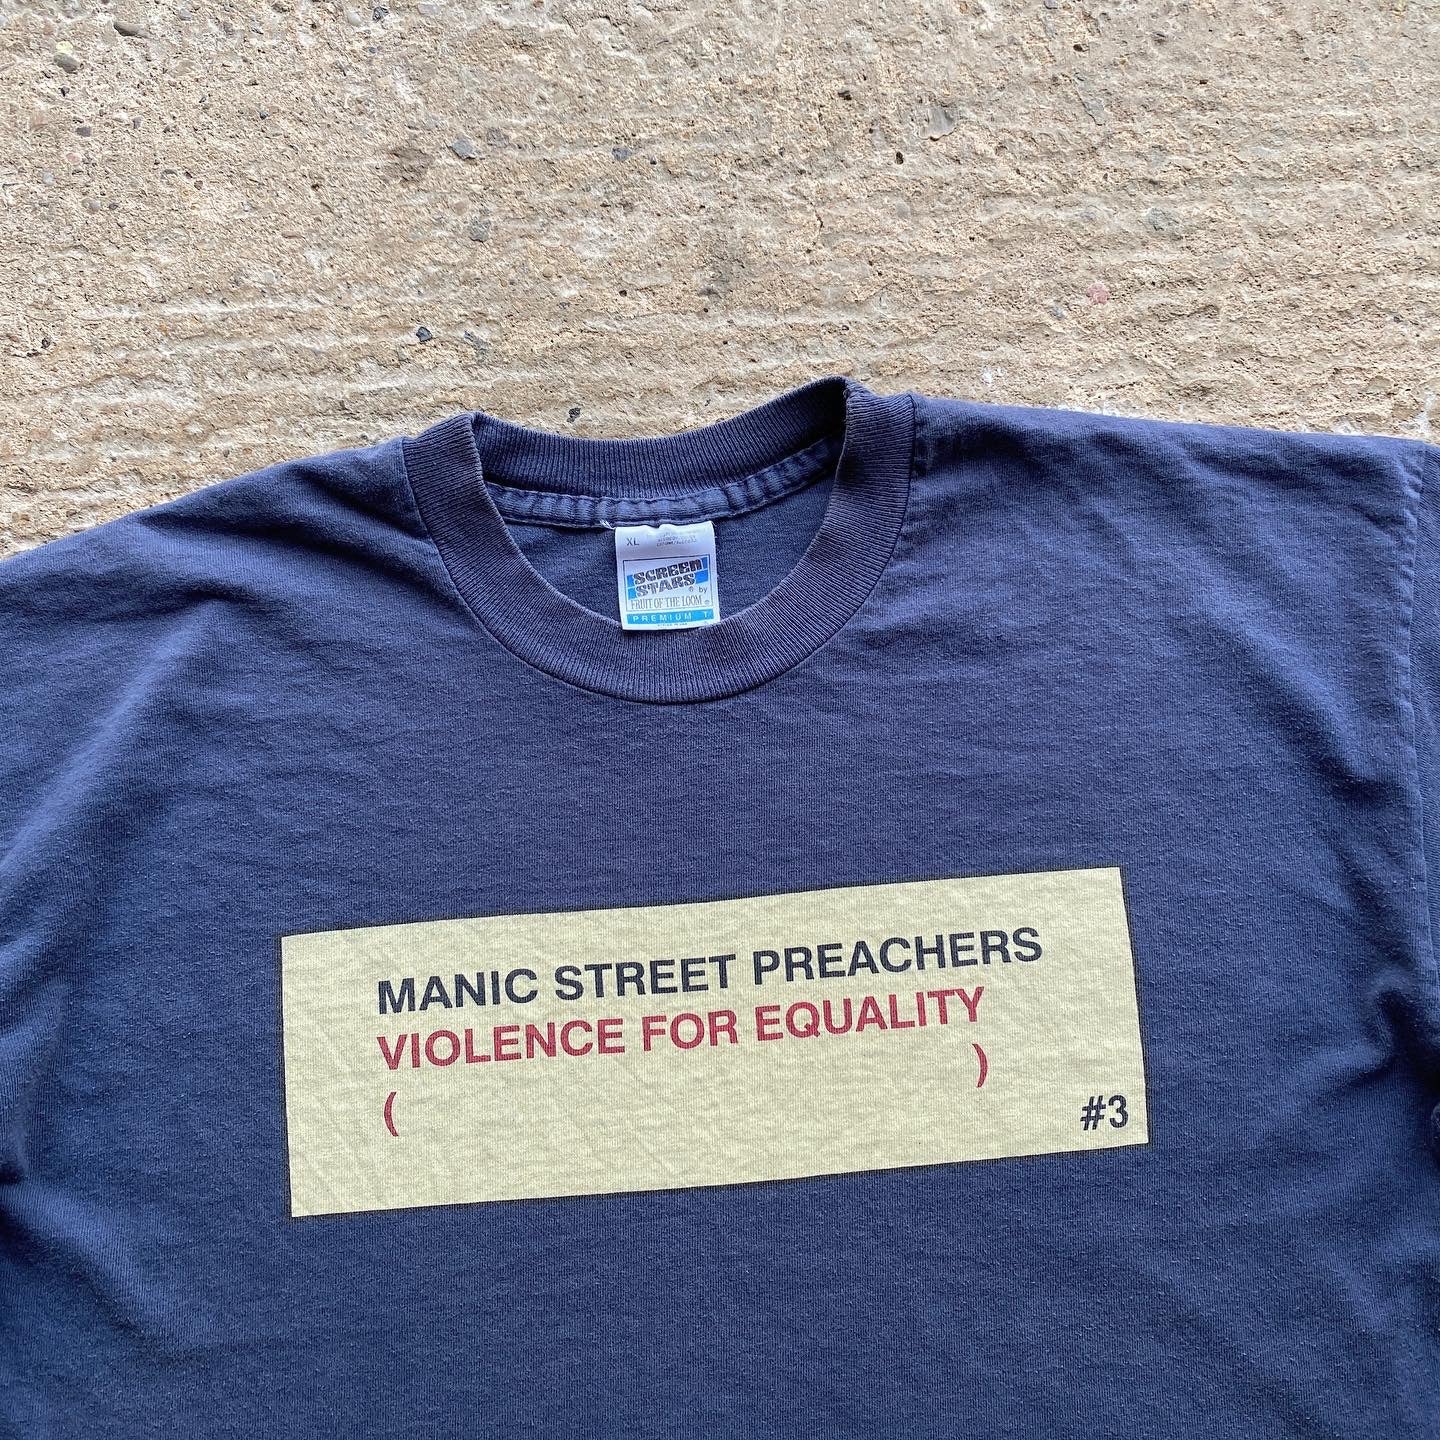 Manic Street Preachers - 'Violence For Equality' - 1996 - XL